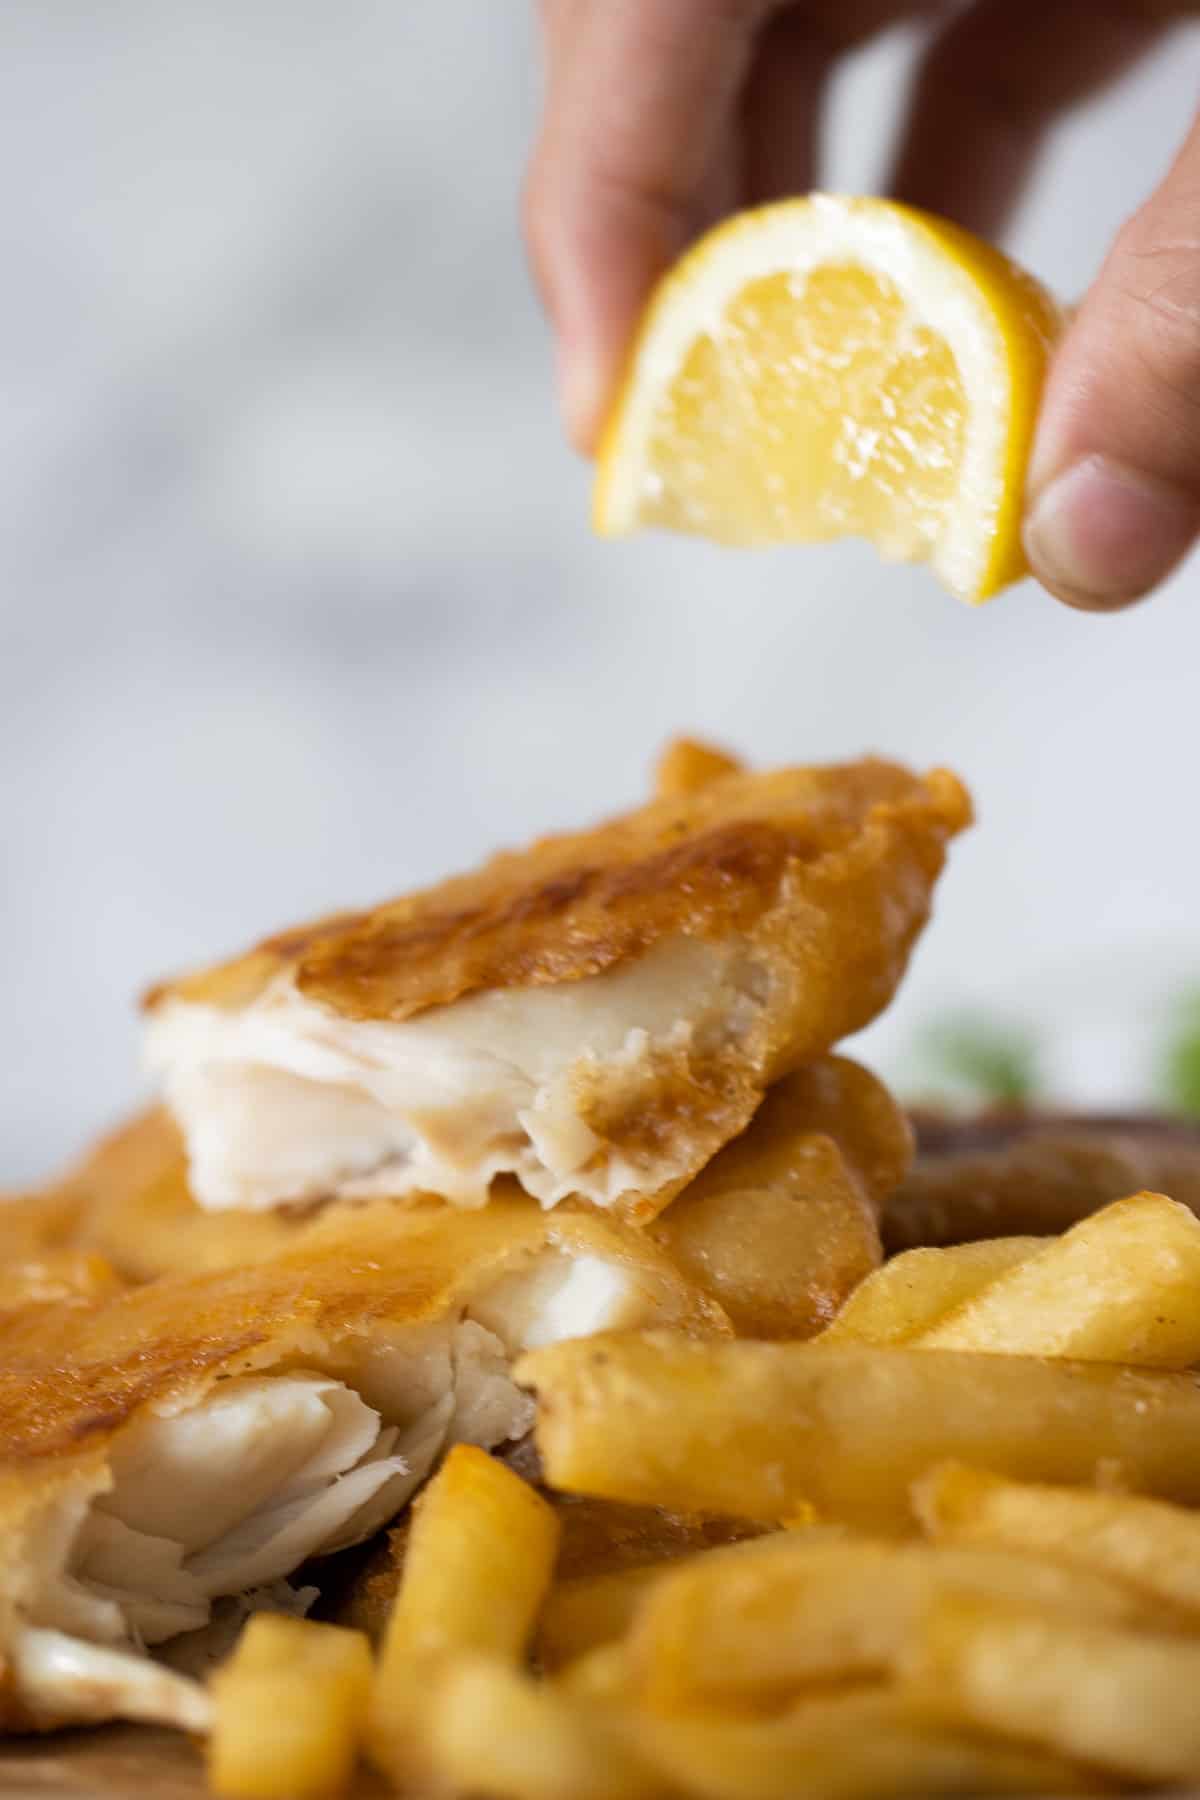 fried tilapia with french fries and a hand squeezing a lemon on top.